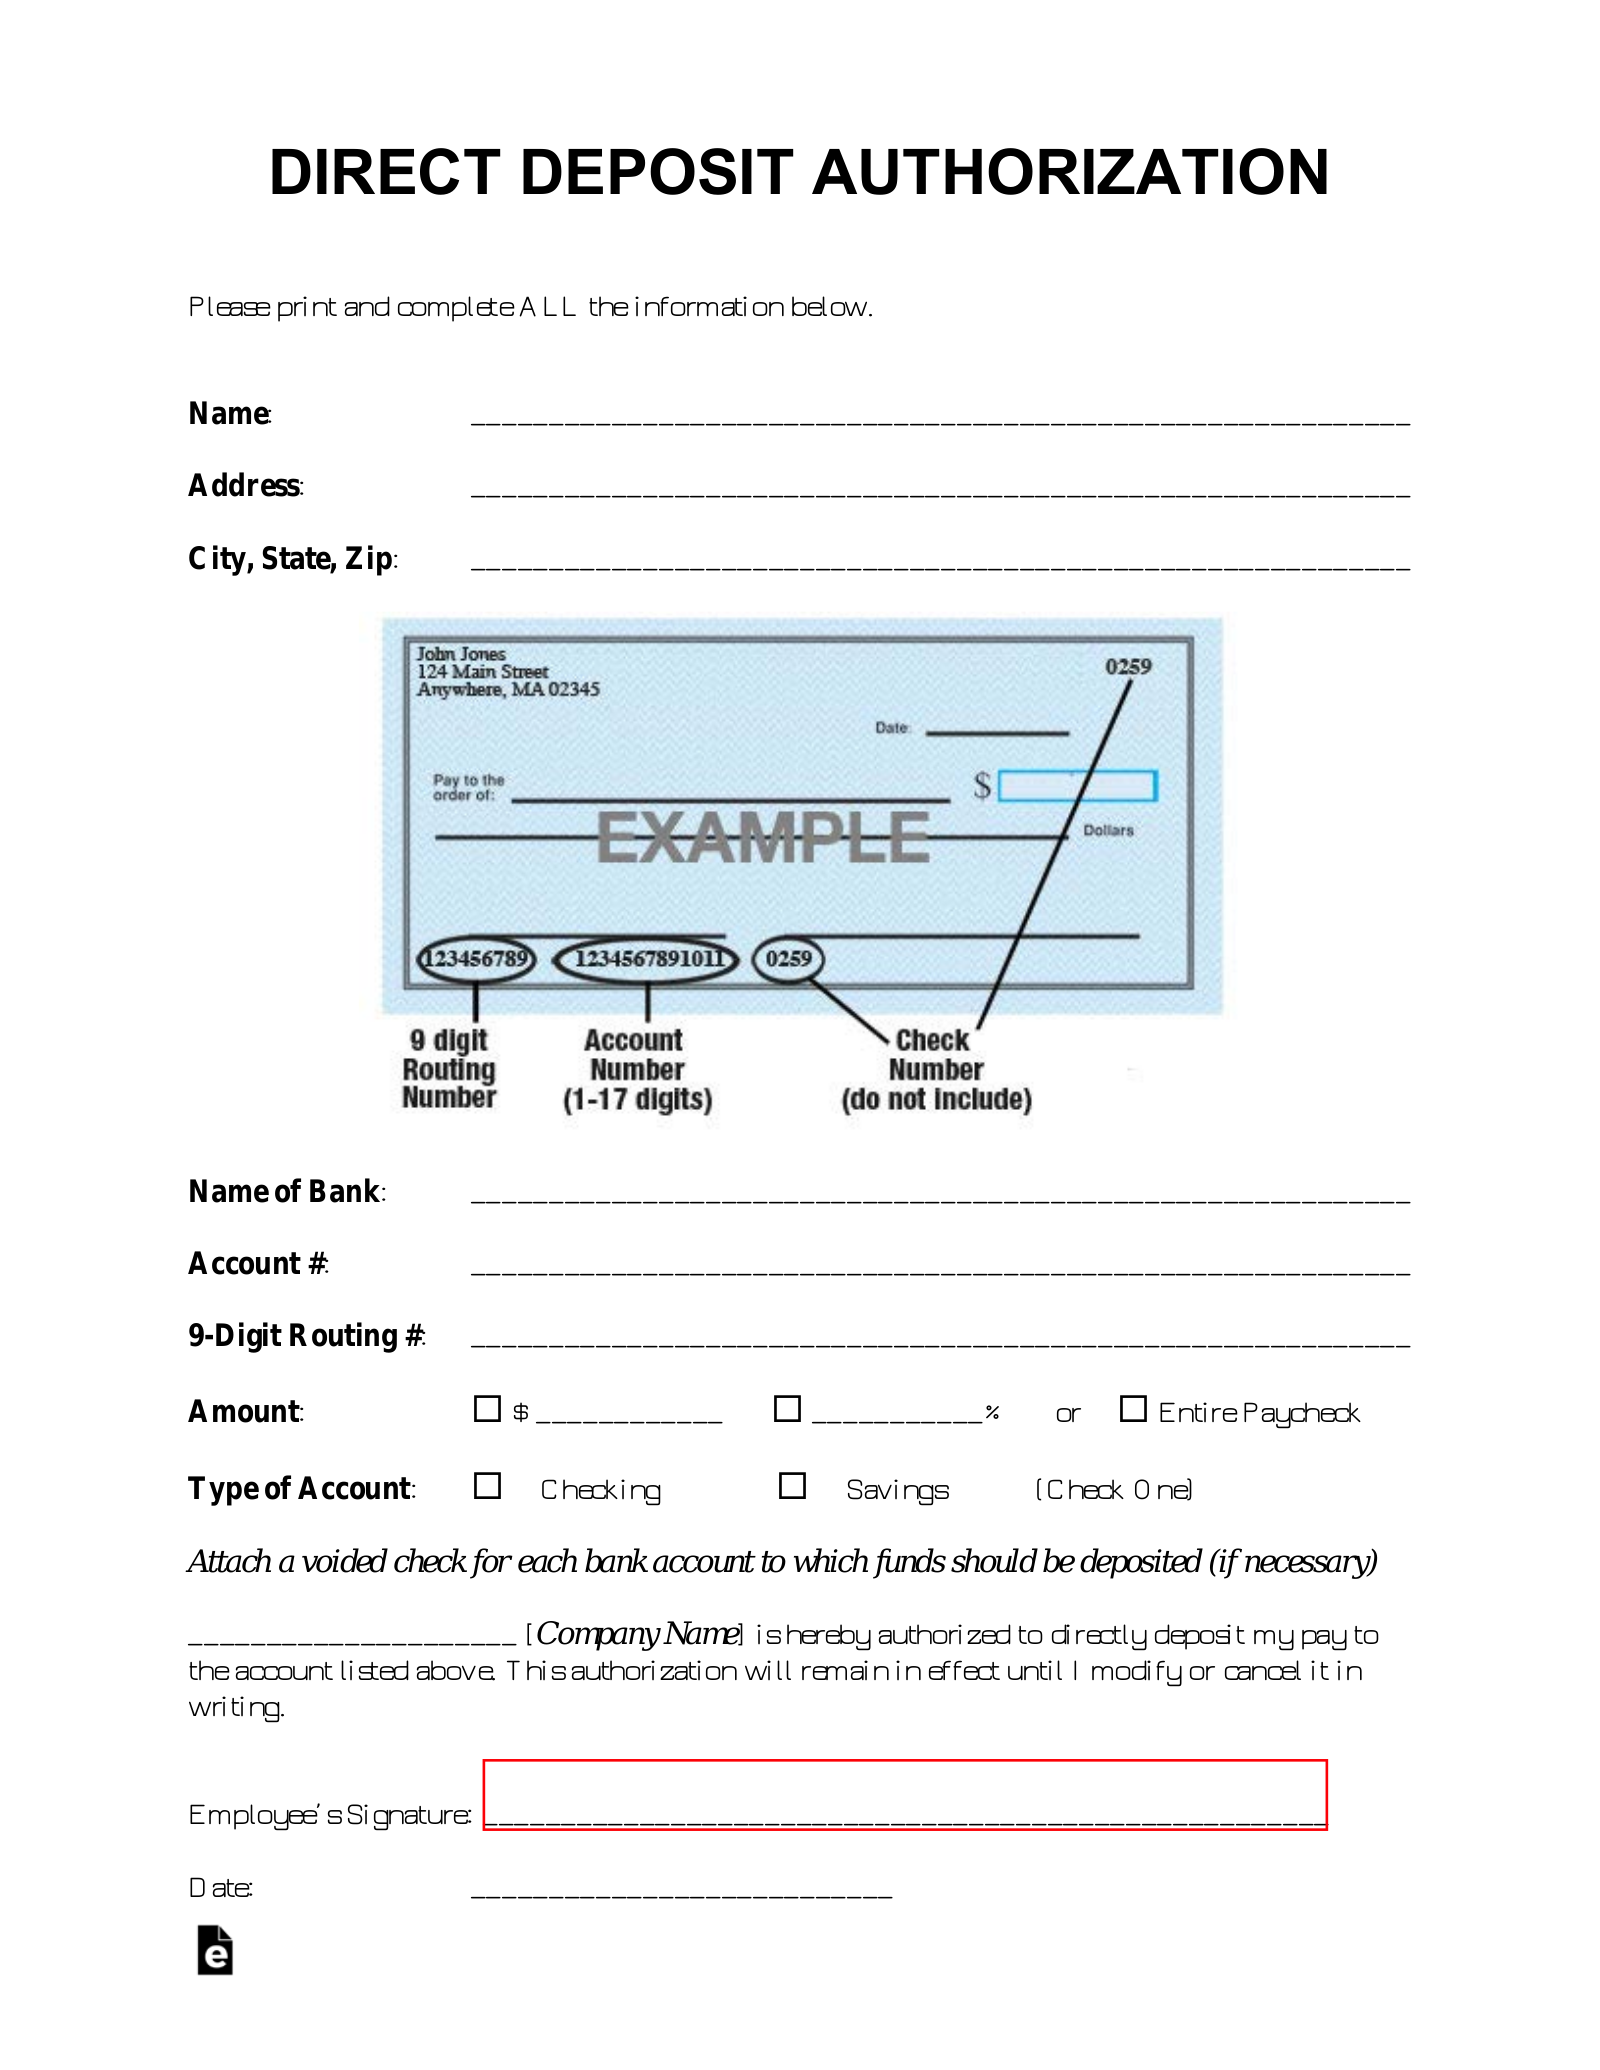 Free Direct Deposit Authorization Forms - PDF  Word – eForms With Direct Deposit Enrollment Form Template Within Direct Deposit Enrollment Form Template